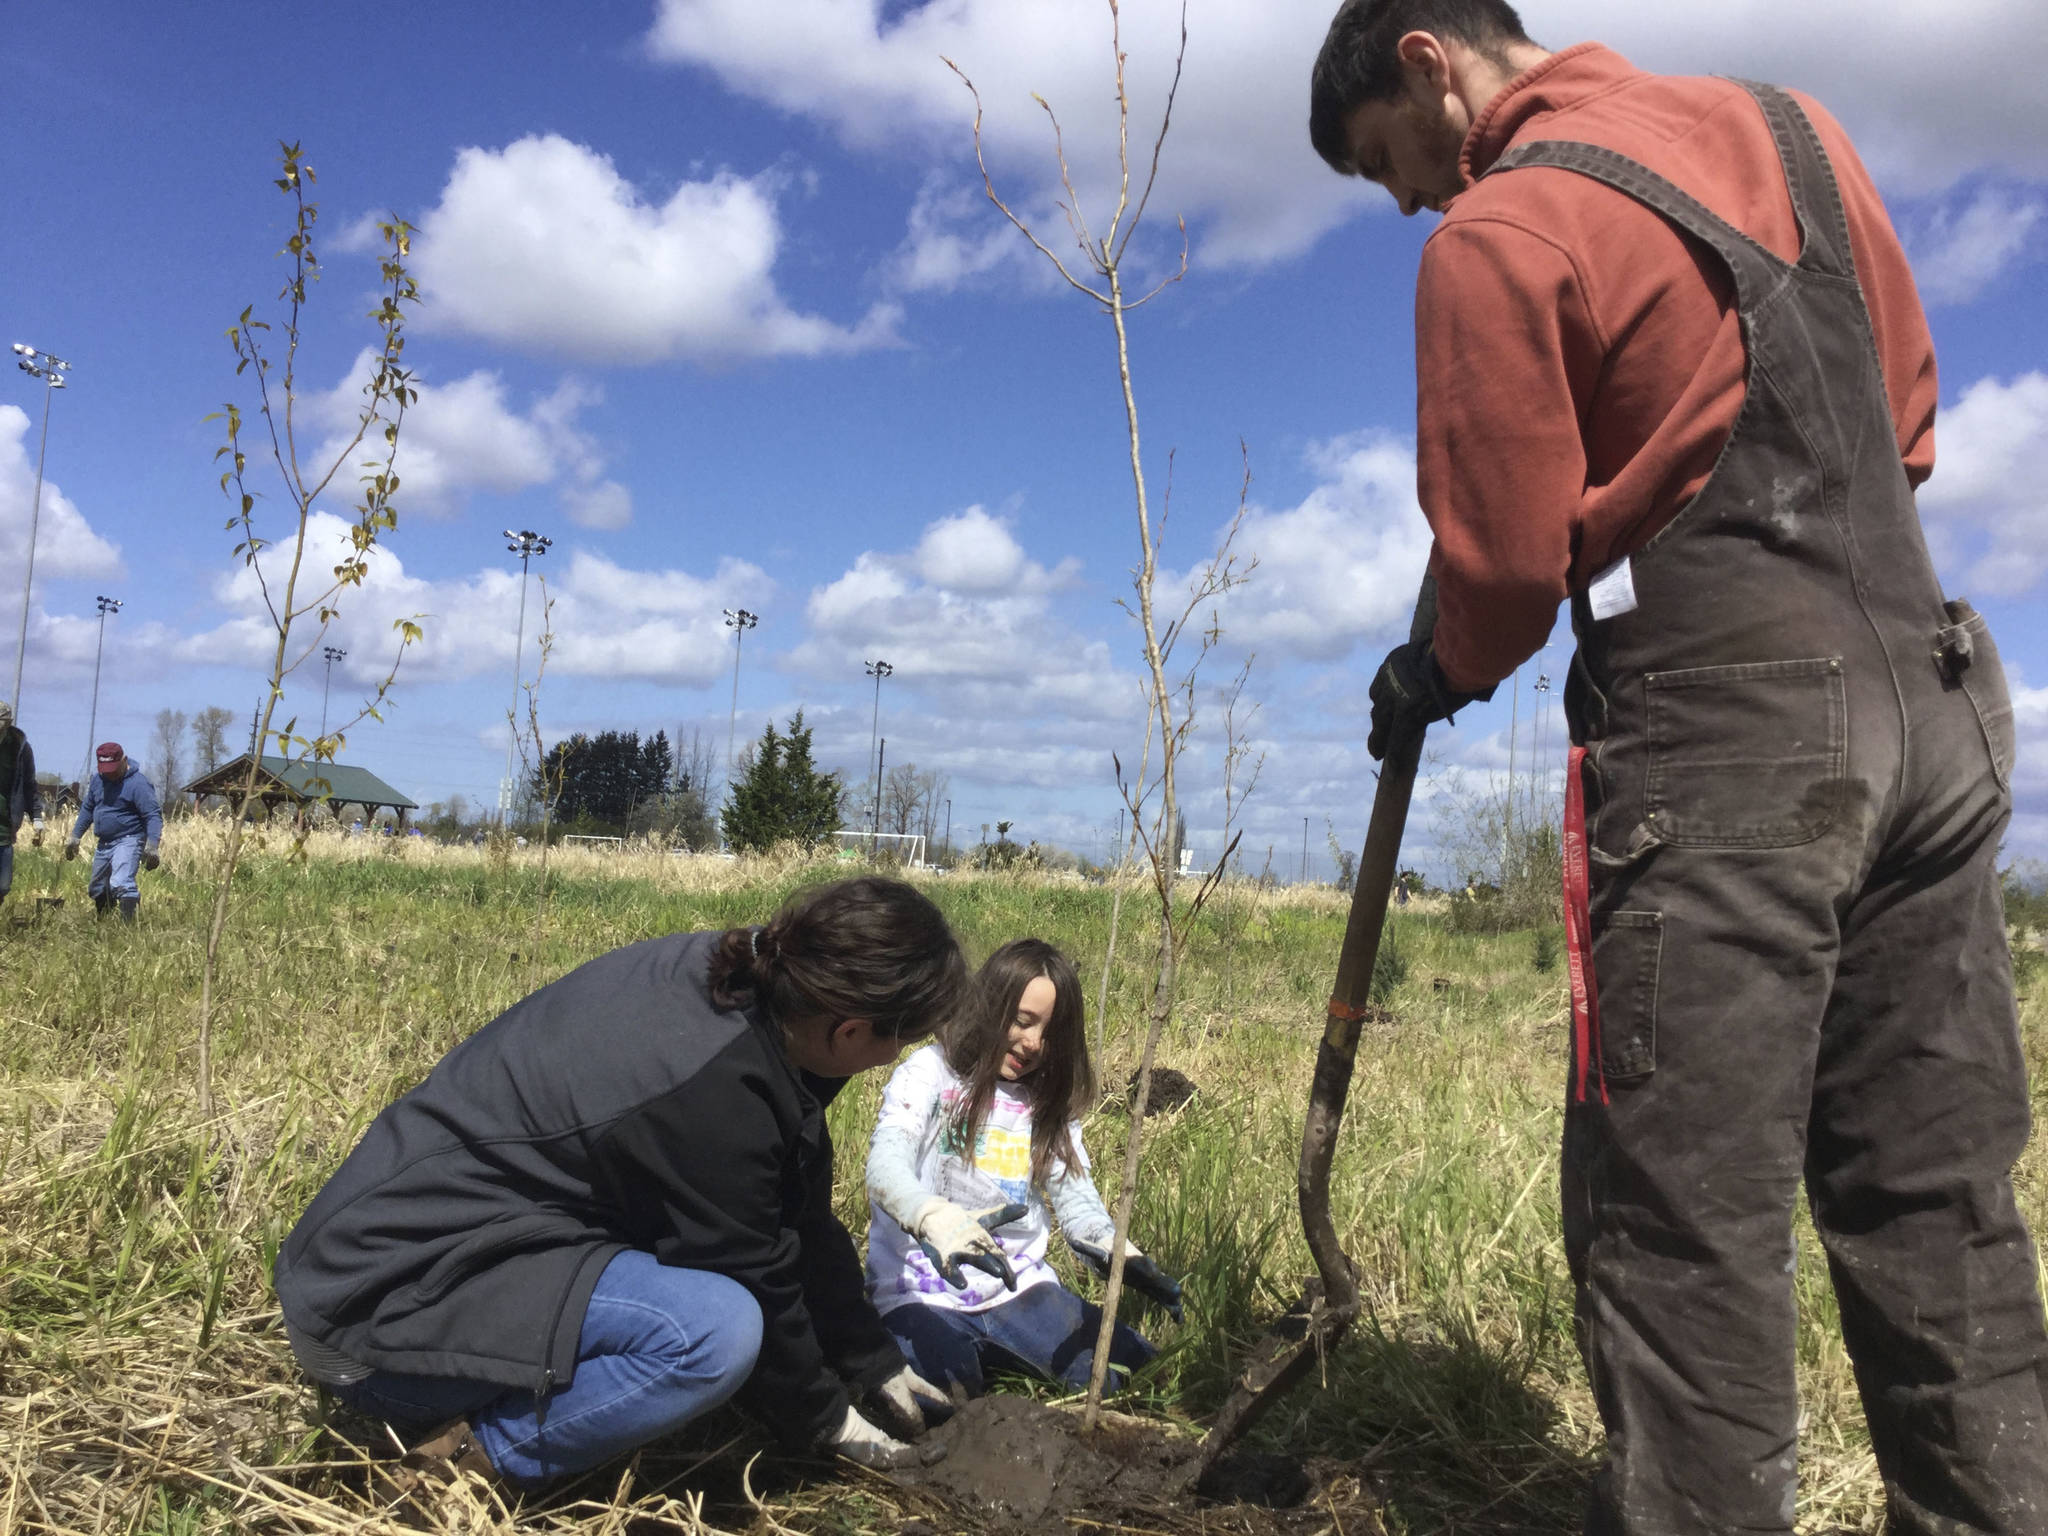 Justine Brock, 7, and her parents Alexa and Josh of Lakewood plant young coniferous trees along the middle fork of Quilceda Creek during an Earth Day event at Strawberry Fields Park in Marysville Saturday.